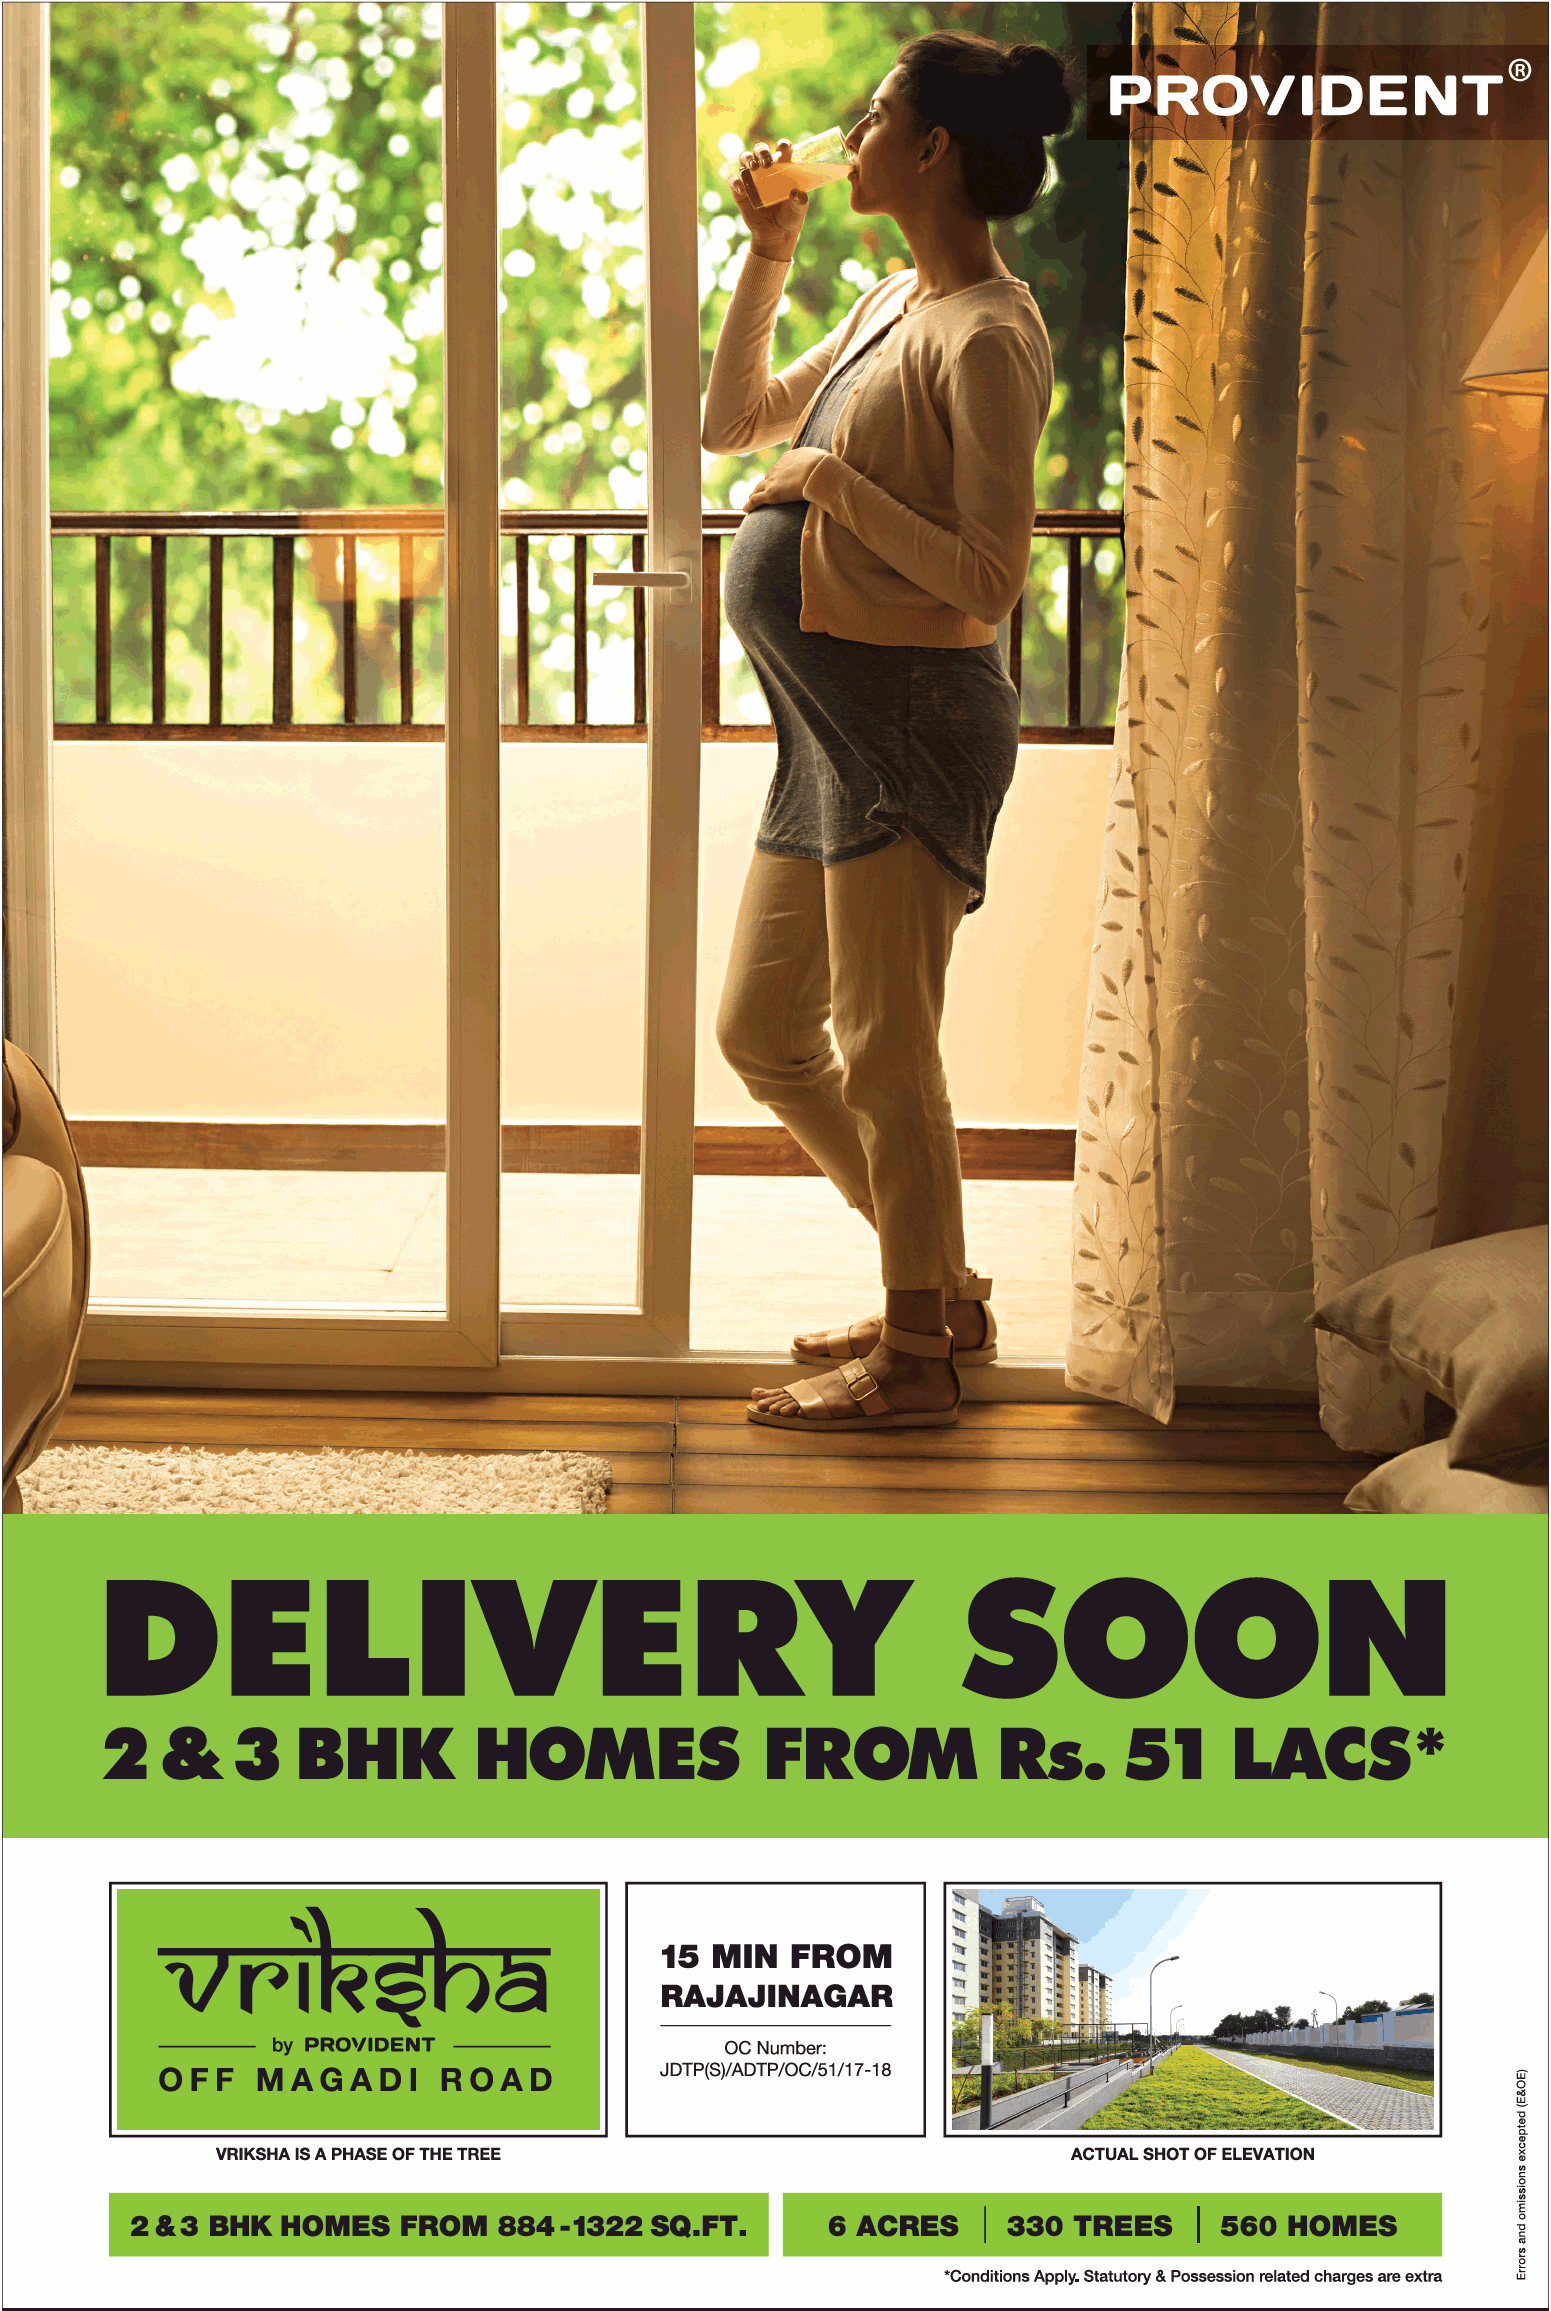 Book 2 & 3 bhk homes from Rs.51 lakhs at Provident Vriksha in Bangalore Update